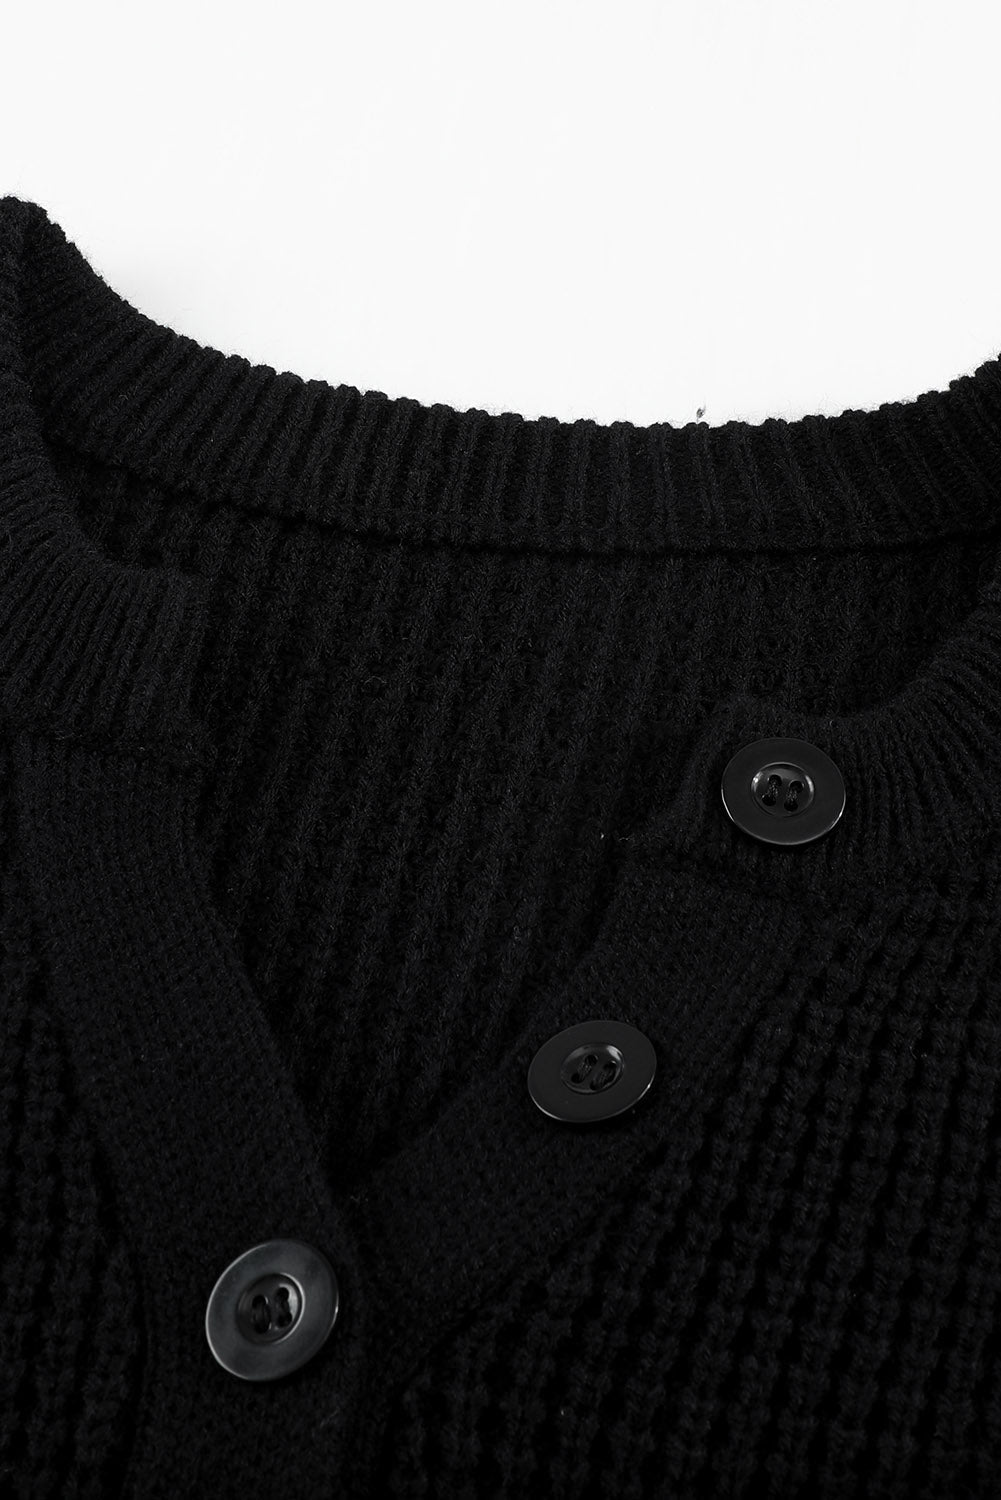 Buttoned Notched Neck Drop Shoulder Waffle Knit Sweater Dress